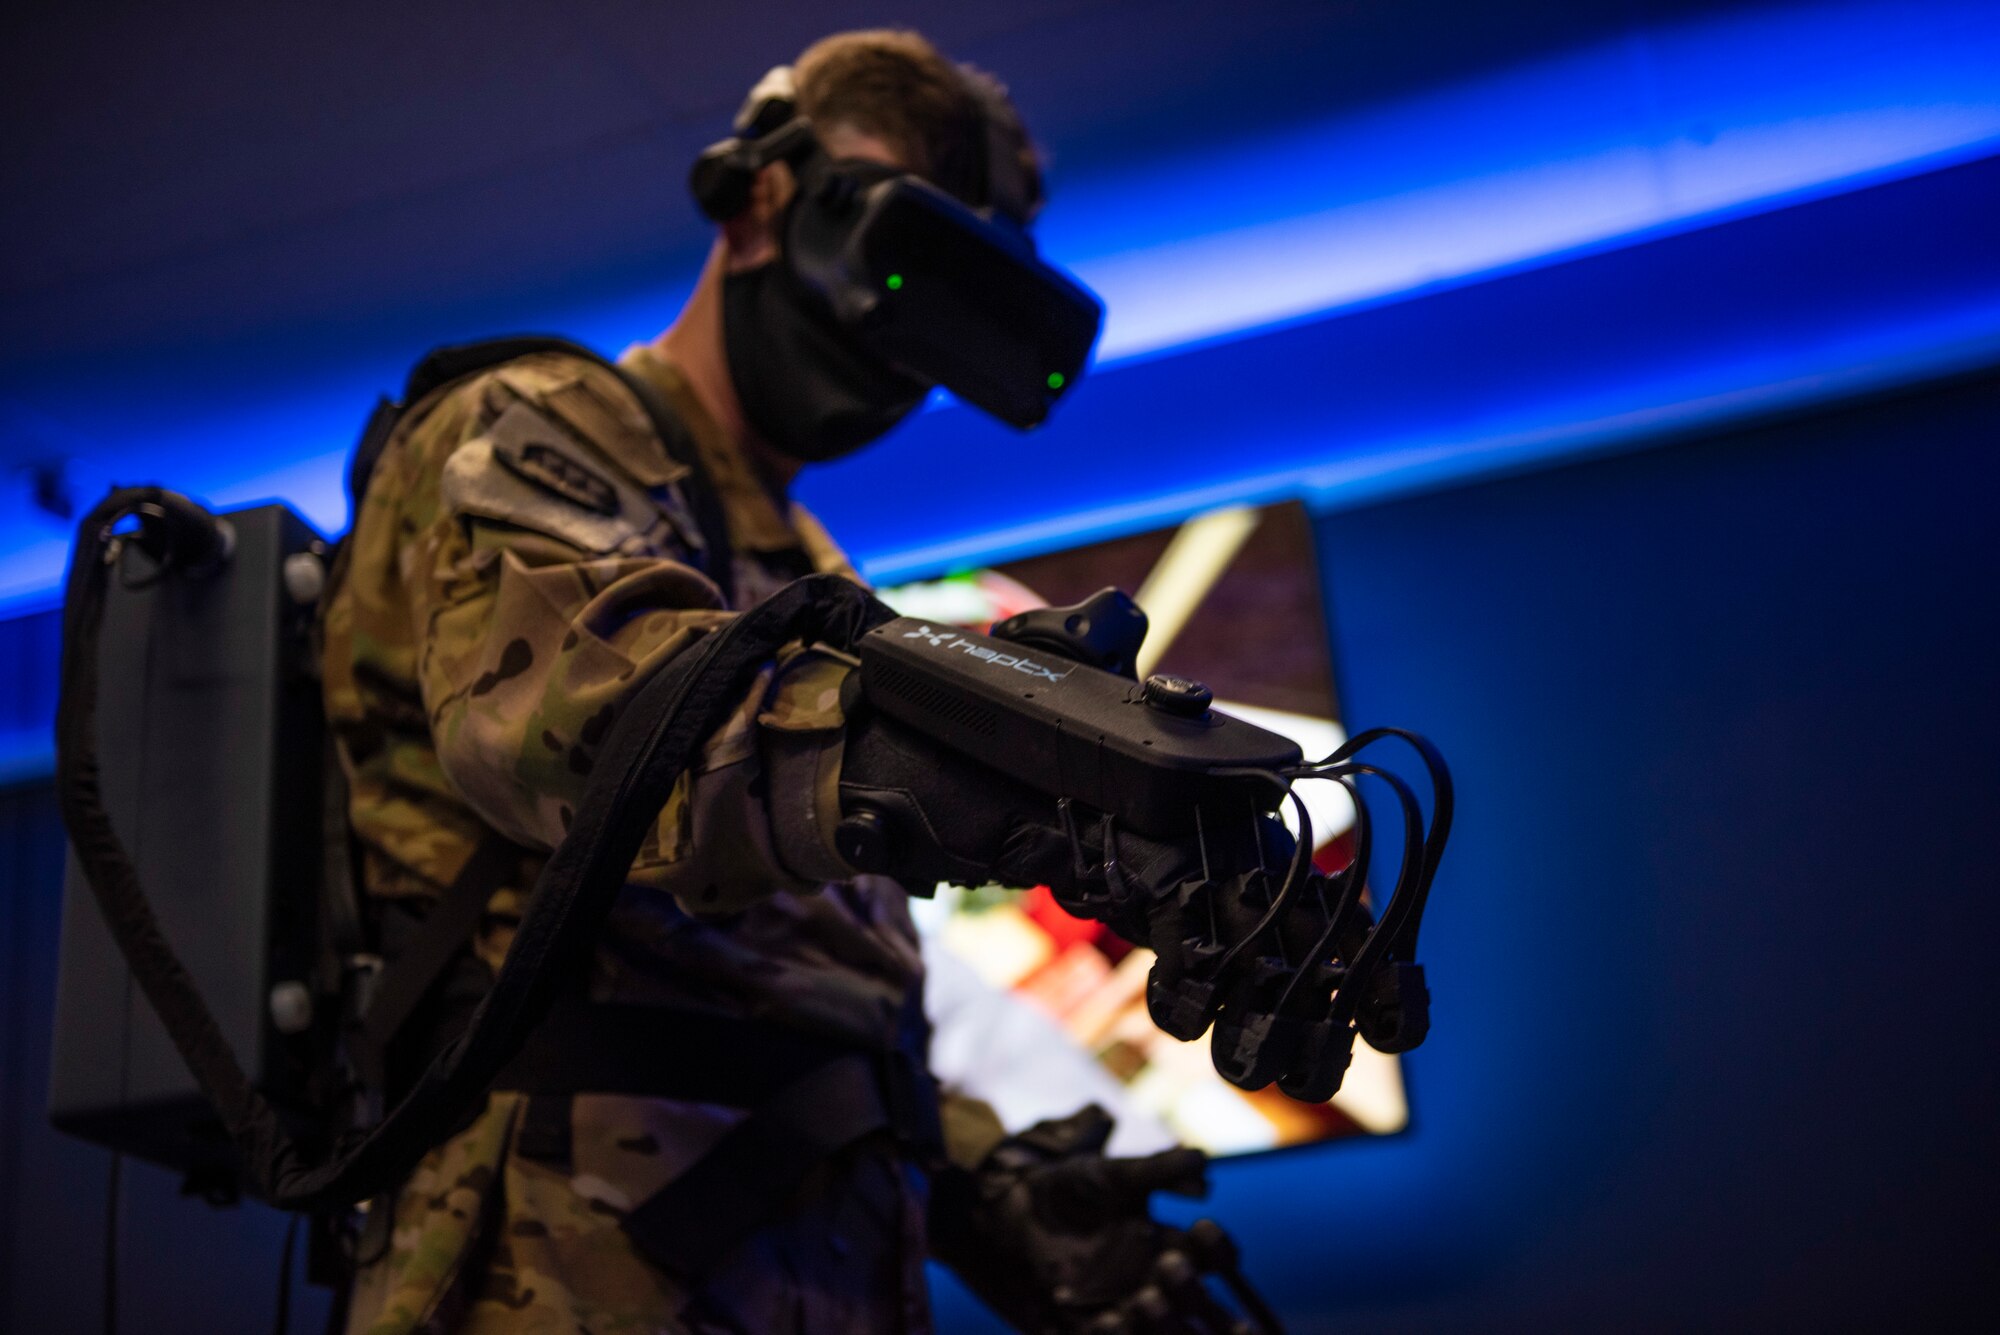 Col. James Young, 317th Airlift Wing commander, tests HaptX Gloves Development Kit 2 at Dyess Air Force Base, Texas, May 10, 2021. The DK2 Gloves can provide an added physical element to a virtual reality training environment. (U.S. Air Force photo by Airman 1st Class Colin Hollowell)